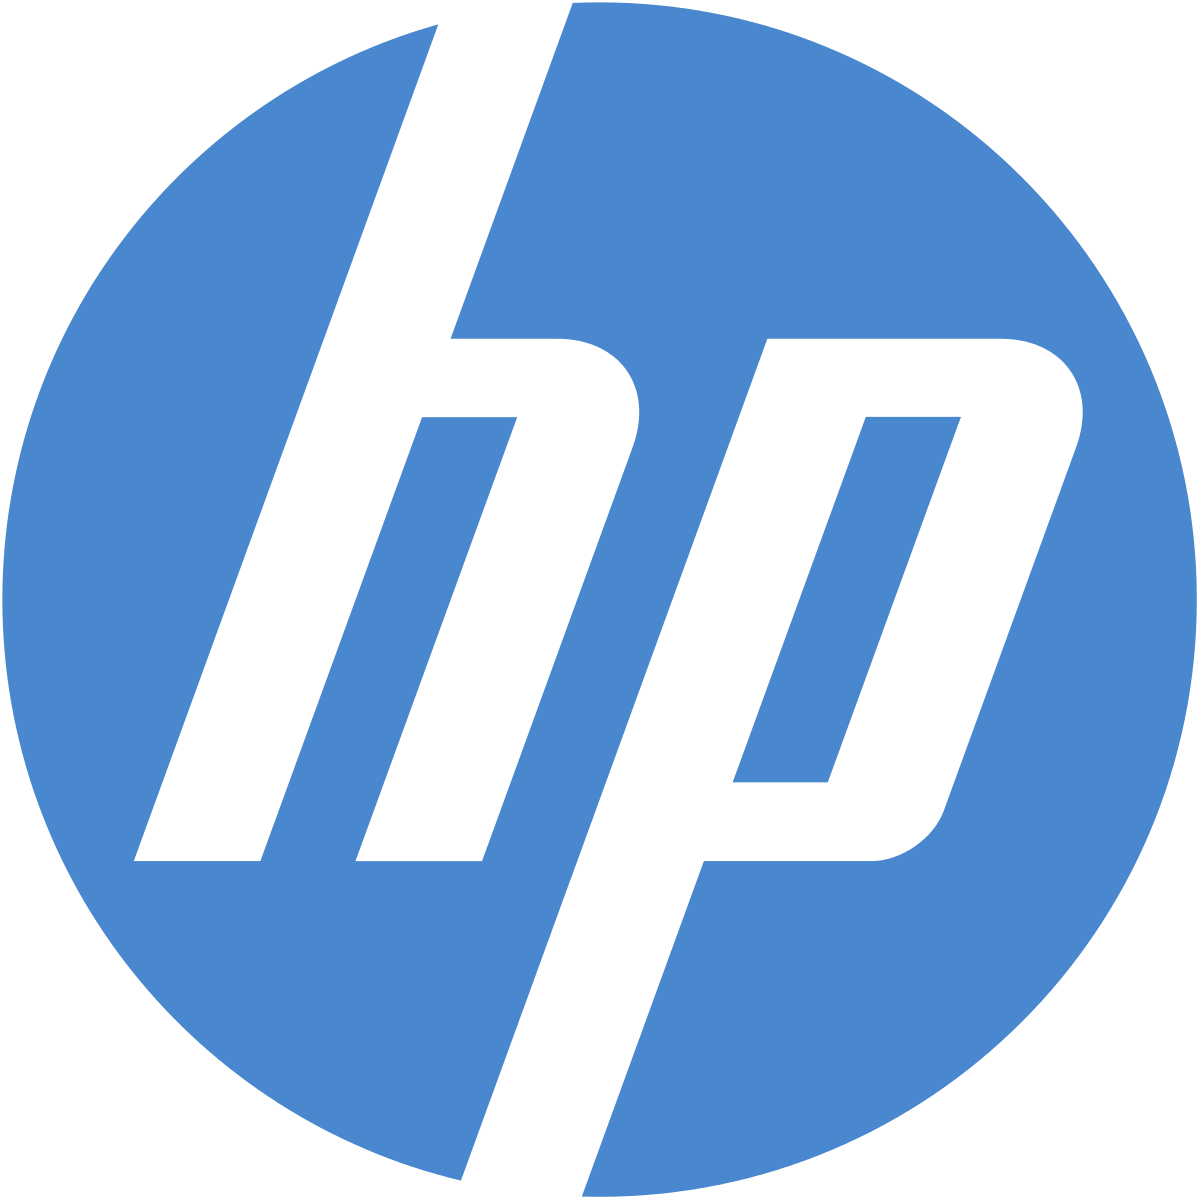 The HP logotype is an example of a monogram